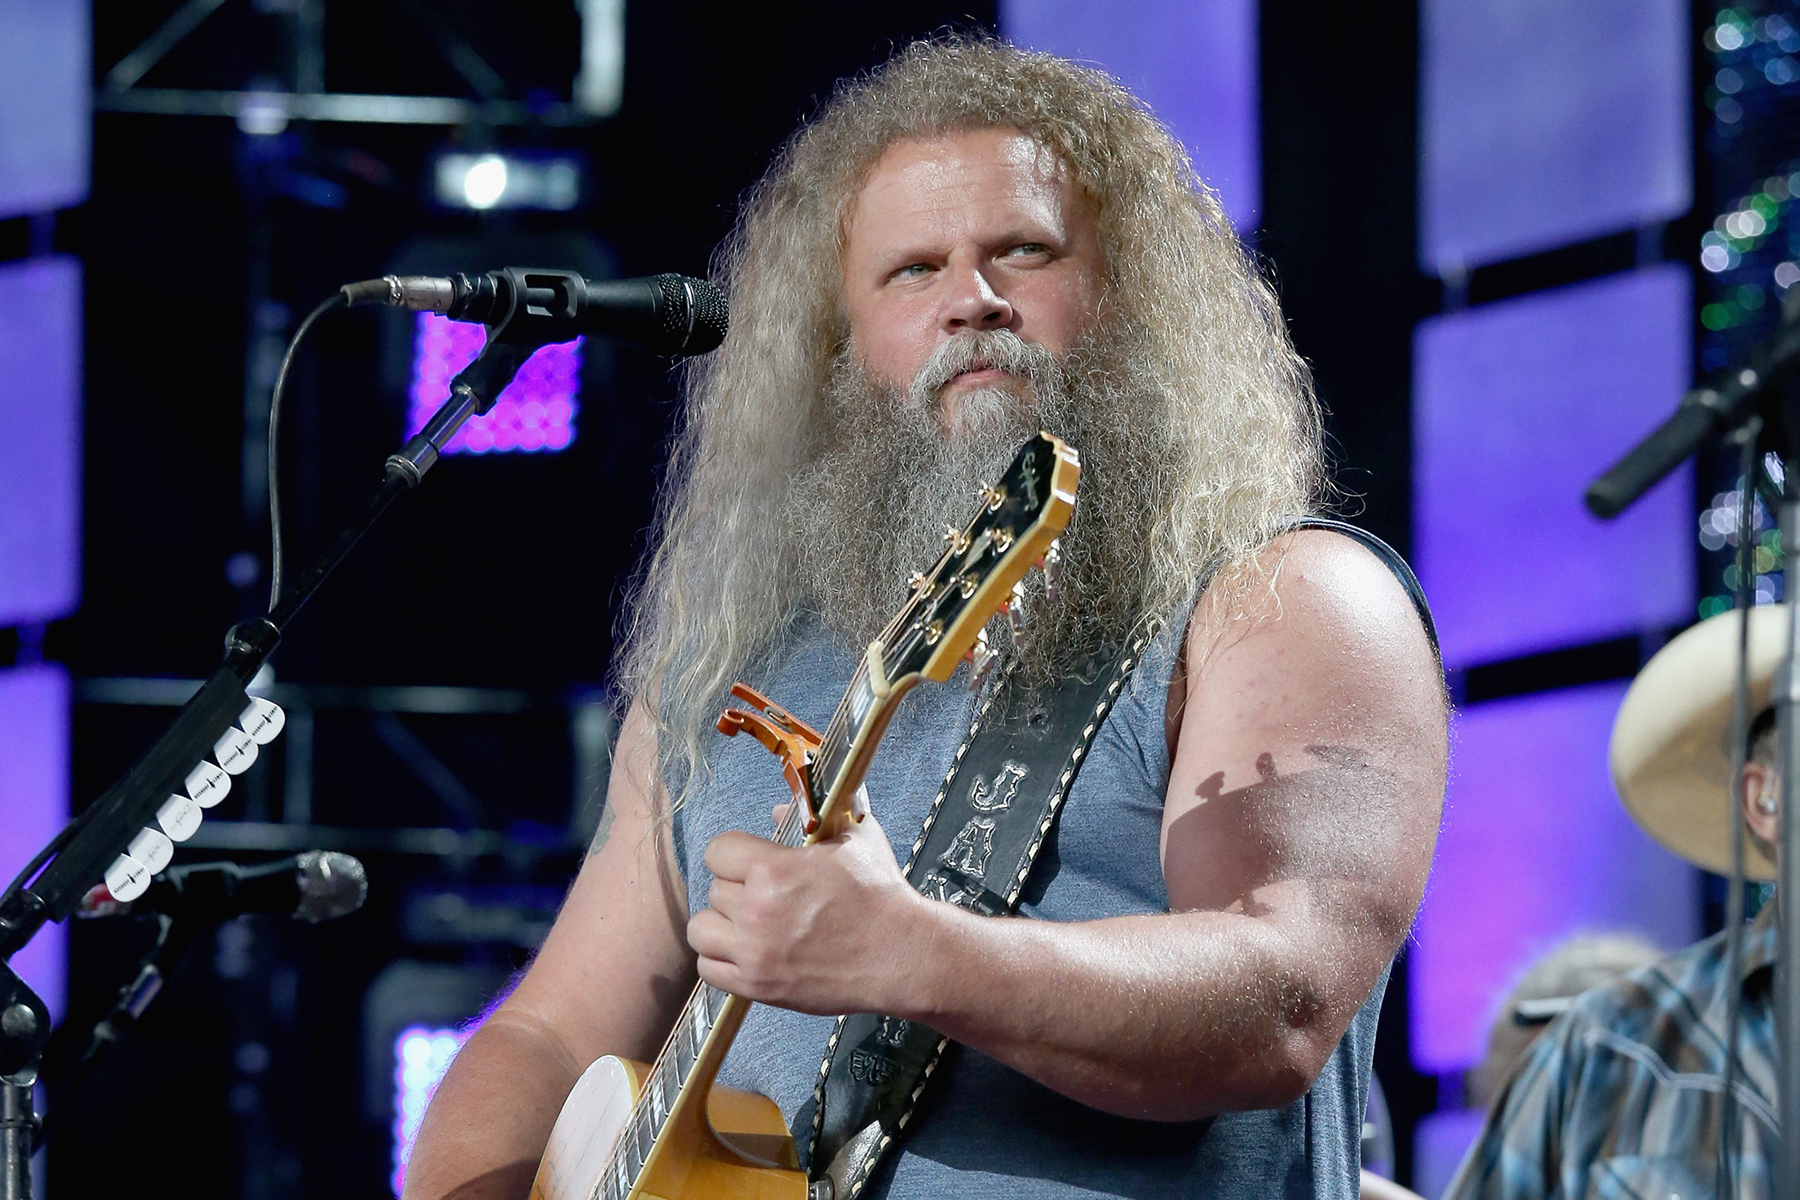 Jamey Johnson’s New Album ‘No, I Don’t Have an Album Coming Out